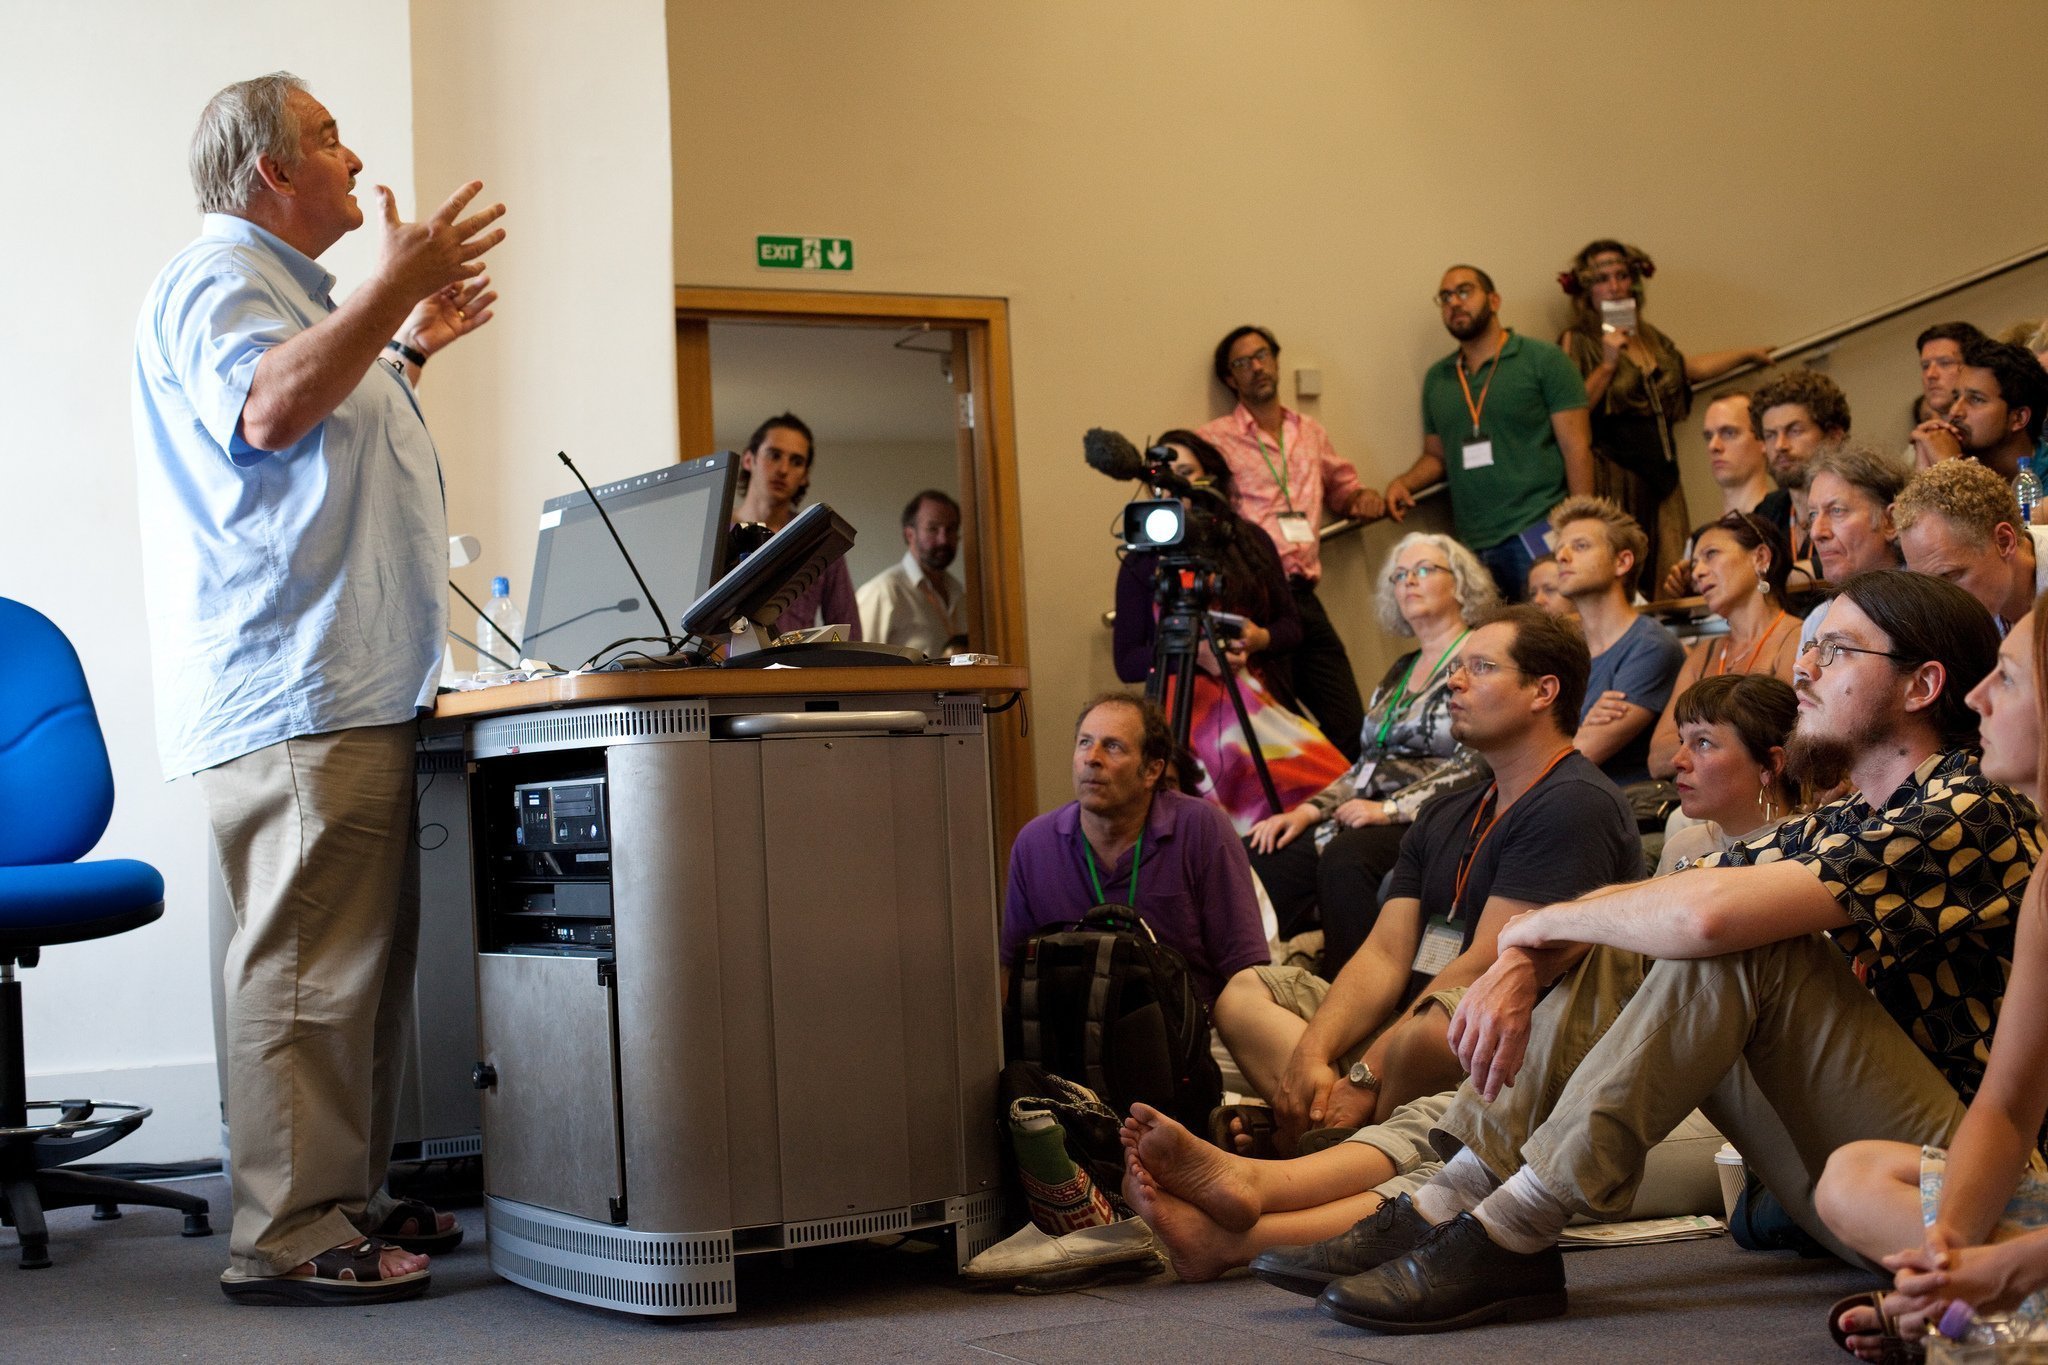 Professor David Nutt addresses delegates at Breaking Convention: a multidisciplinary conference on psychedelic consciousness, featuring more than 130 presenters from around the world. Photo Credit: Jonathan Greet 2015